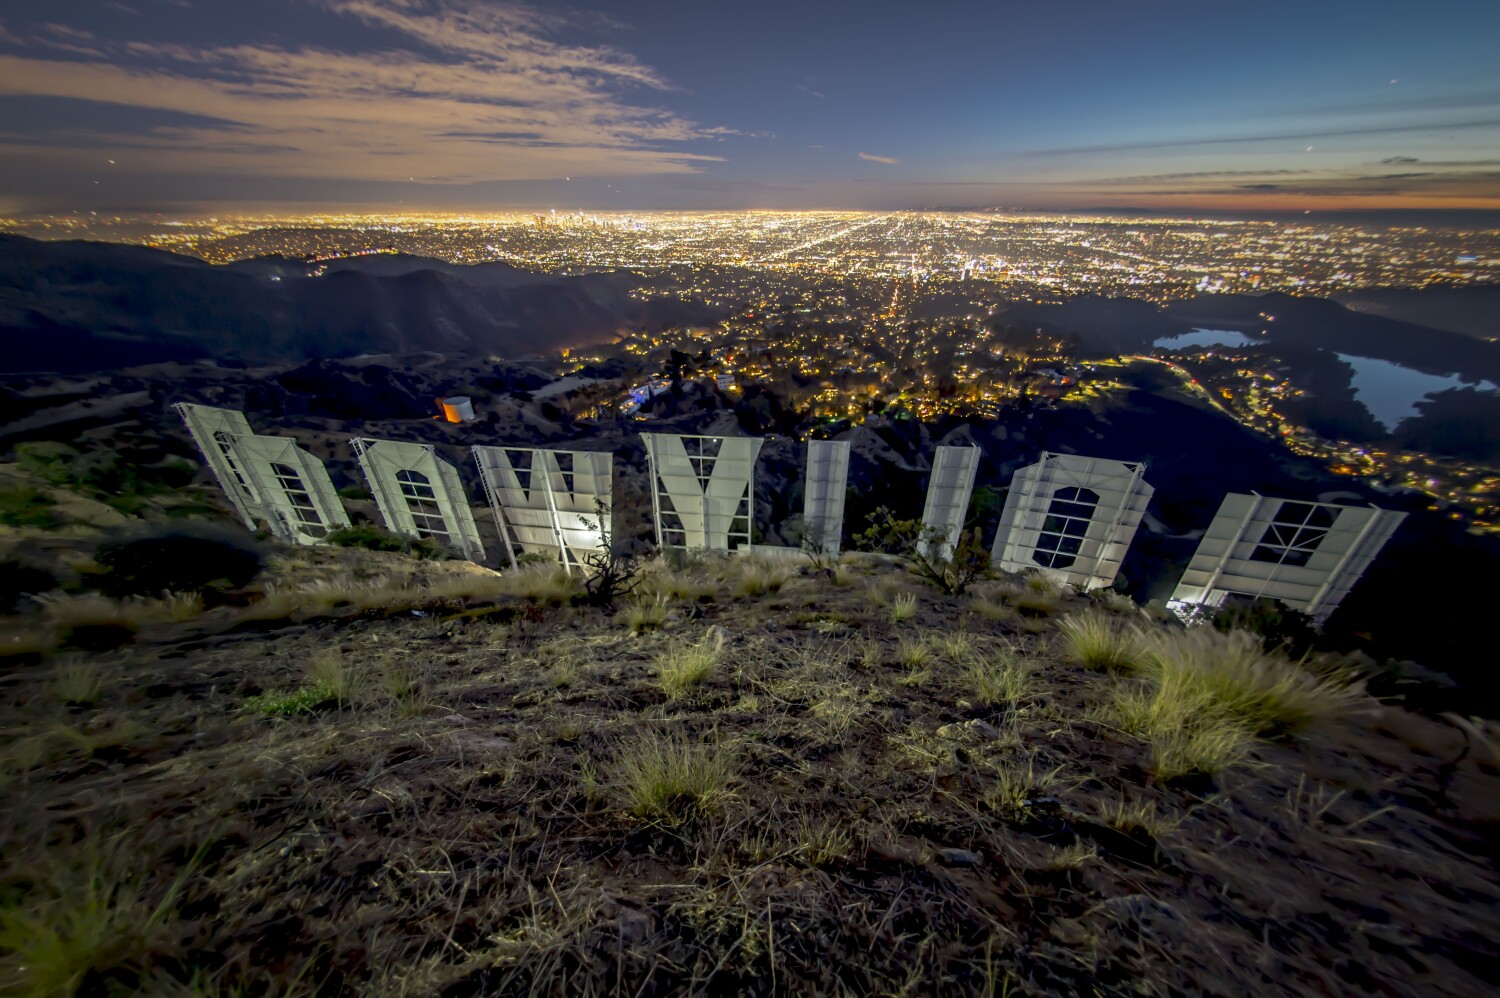 Why isn't the Hollywood sign lighted at night? 